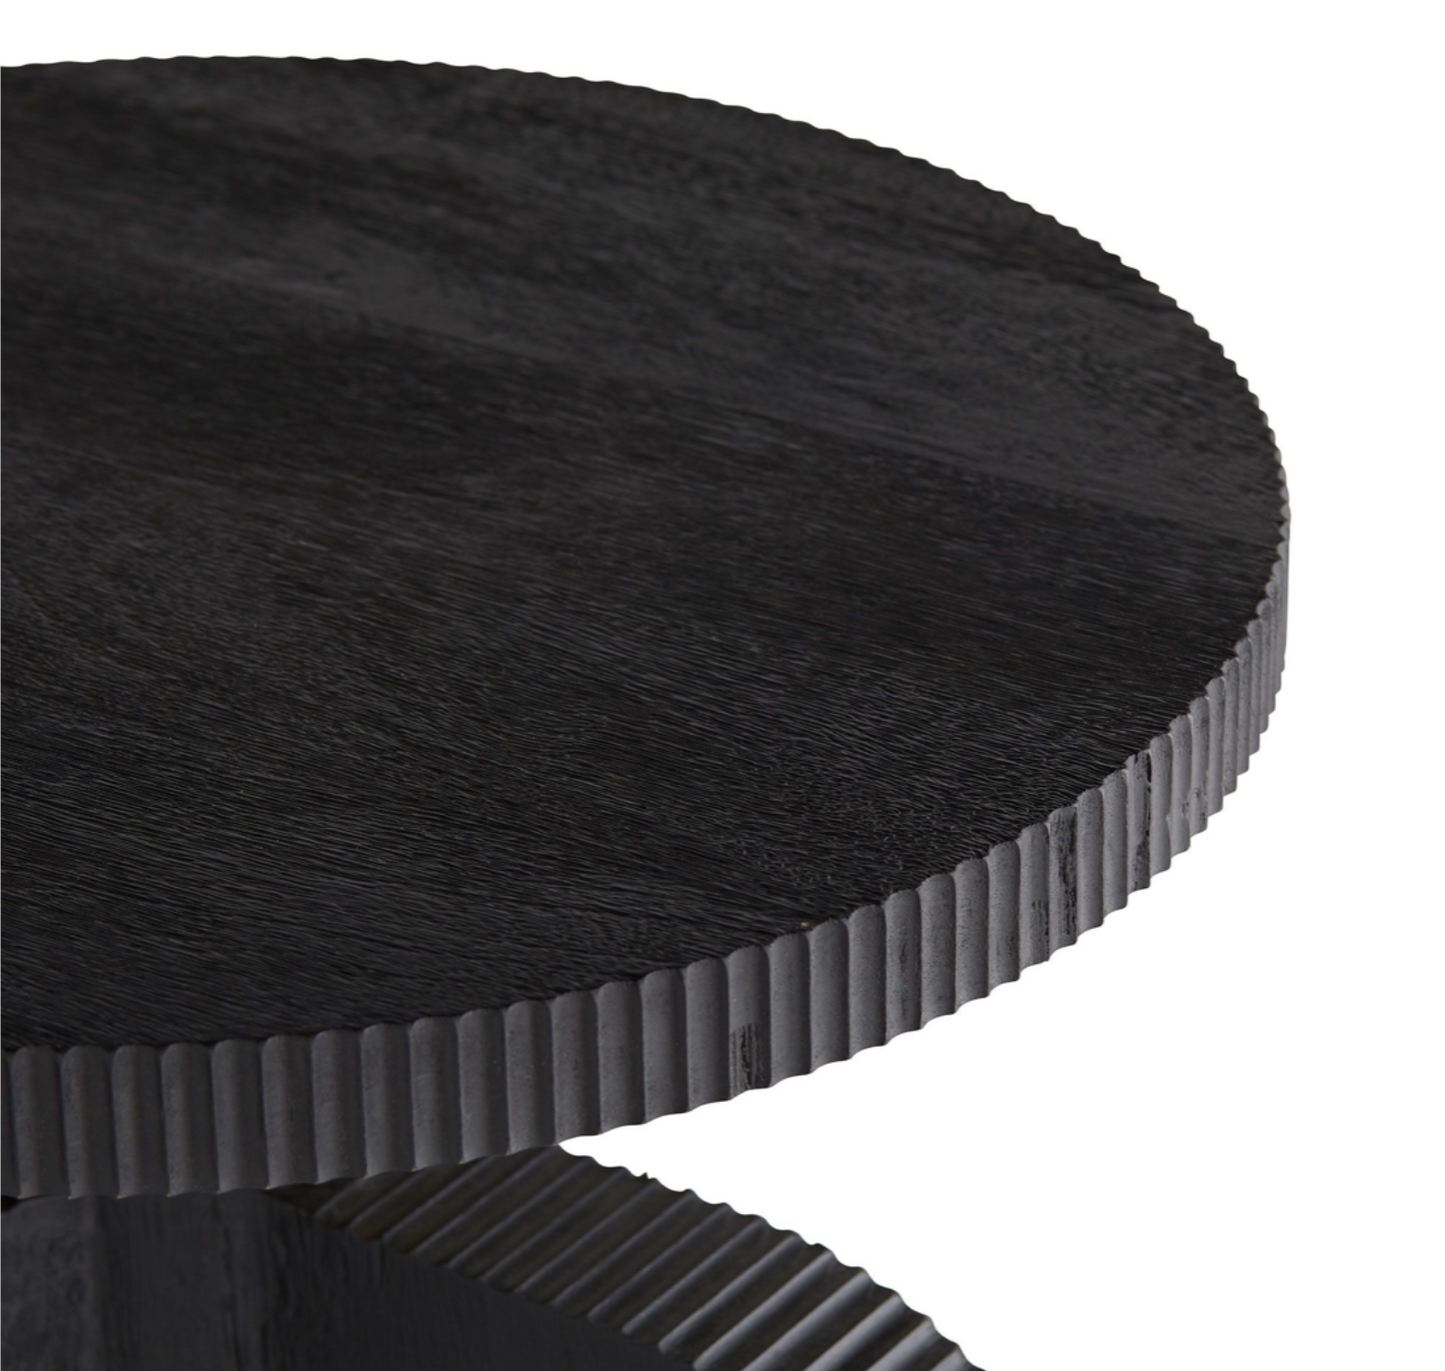 Black wood side table, 3 legs, round fluted top